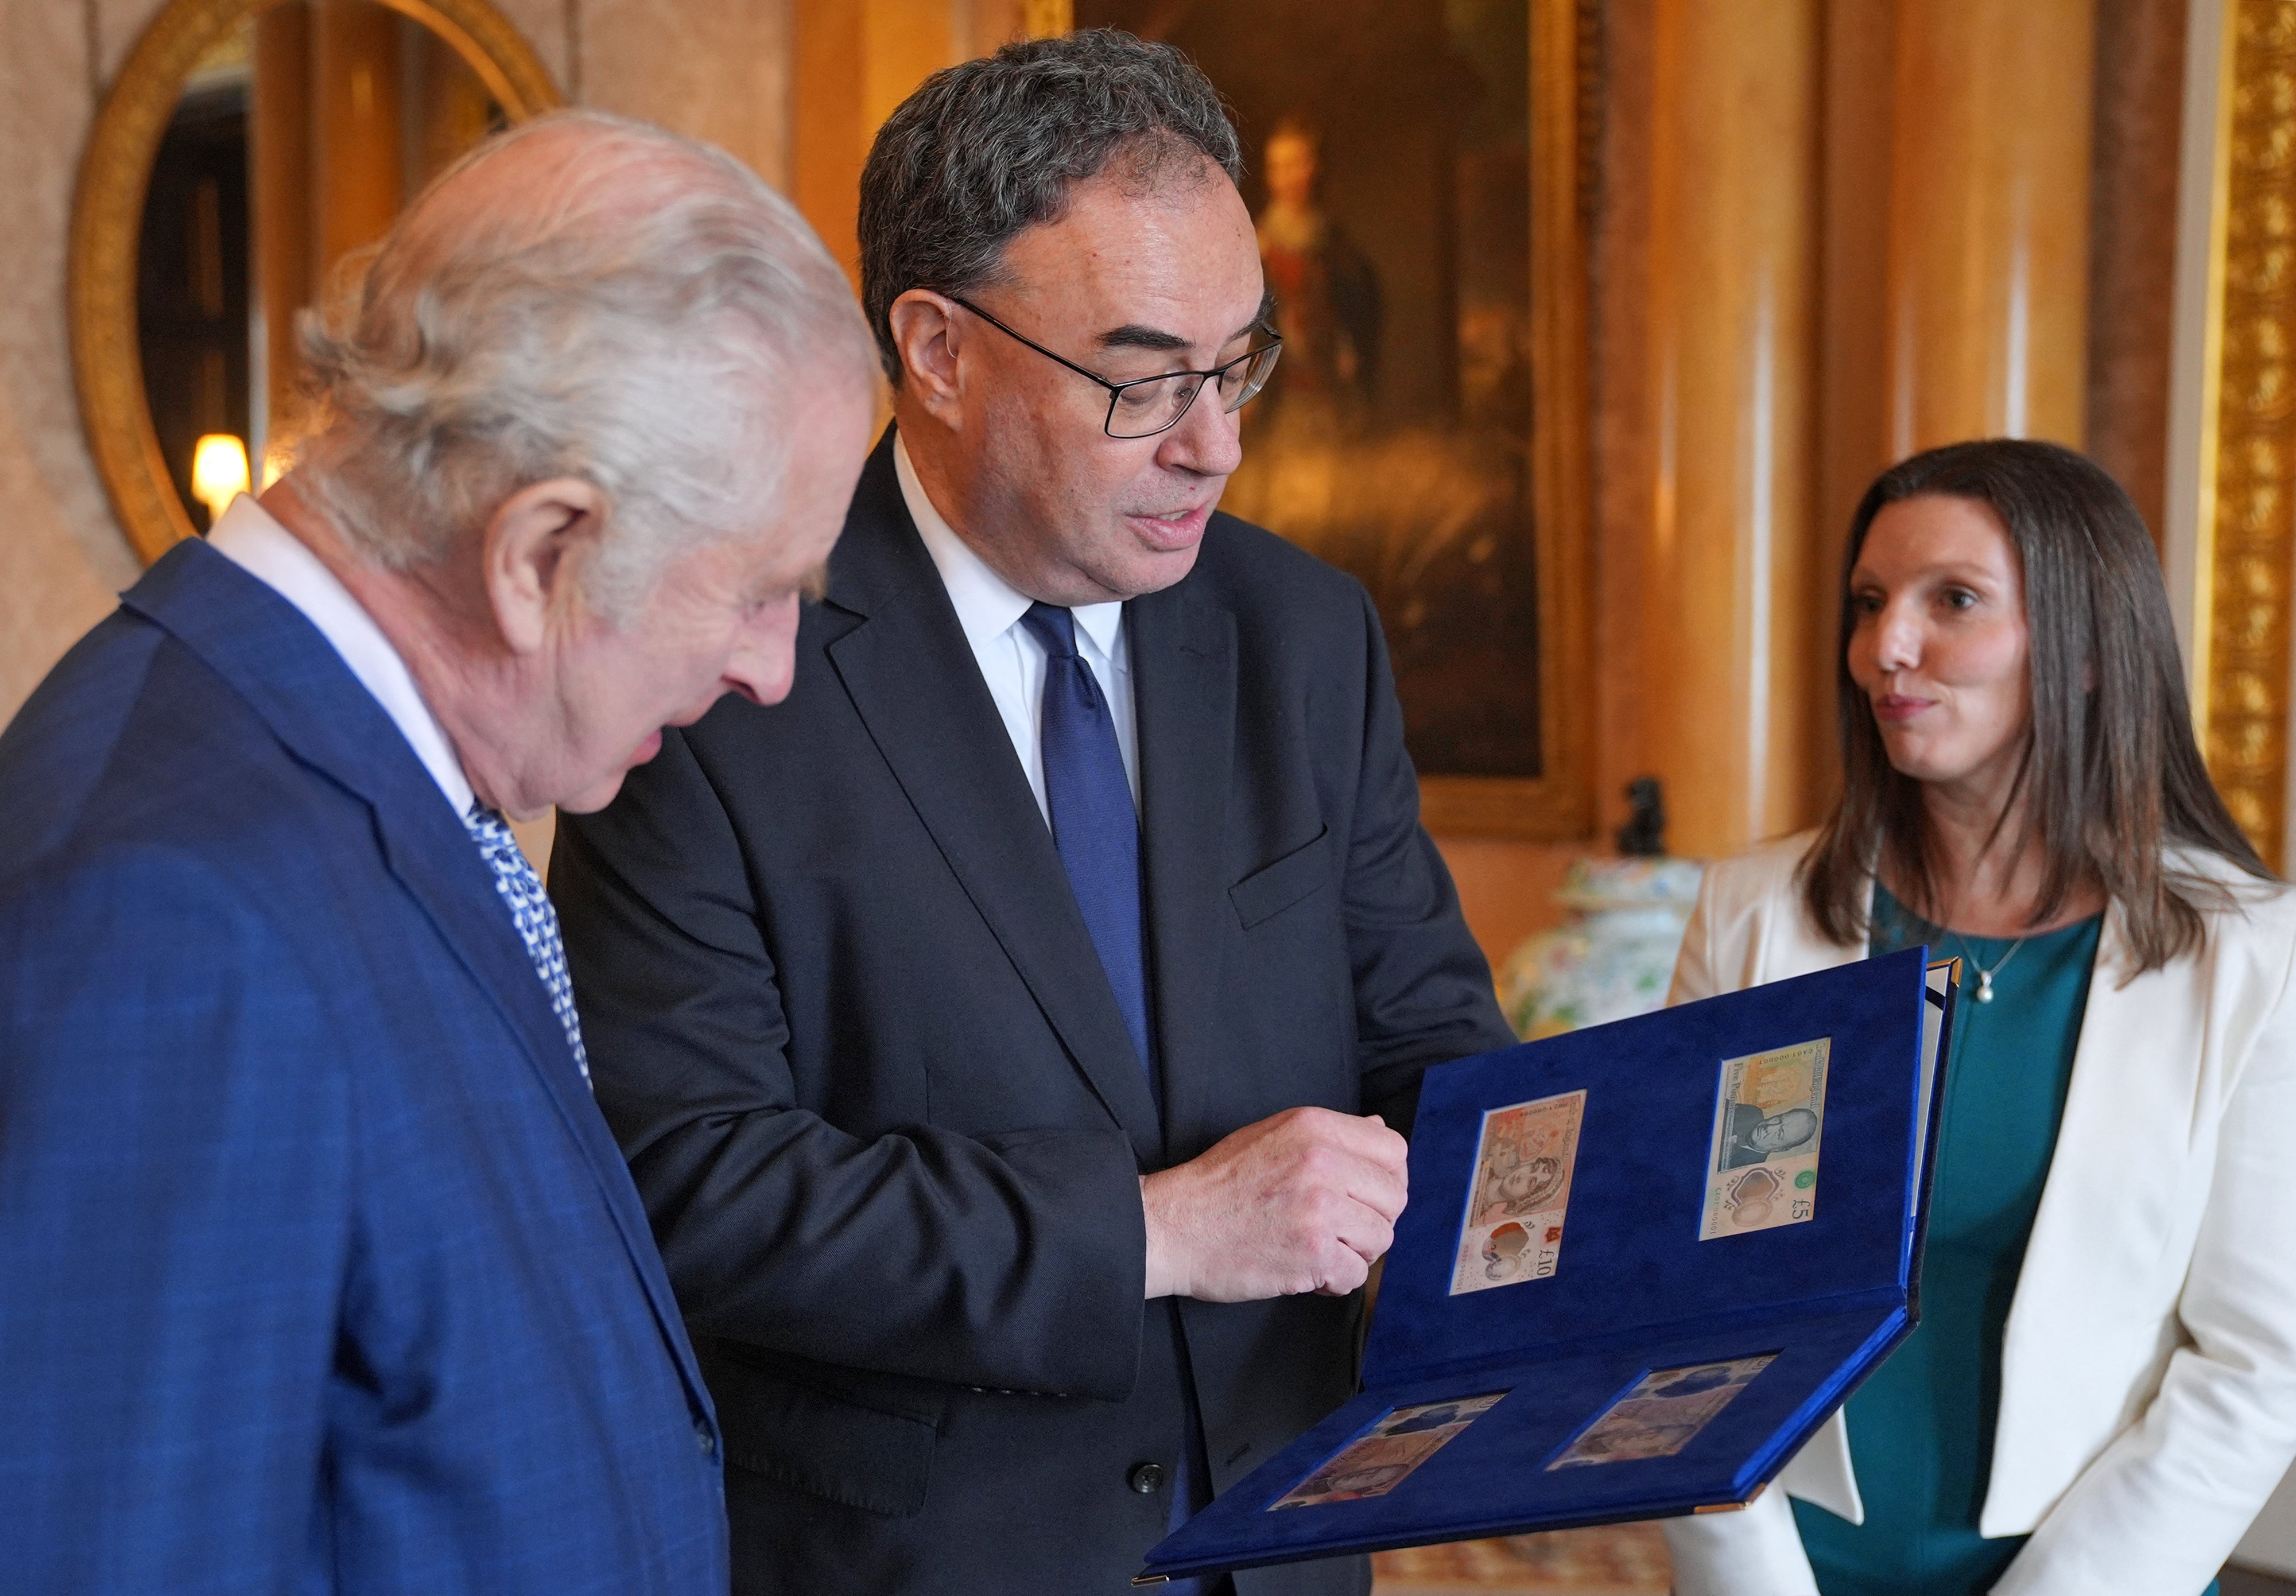 King Charles III (L) is reacts as Bank of England Governor Andrew Bailey (C) and Bank of England's Chief Cashier Sarah John present him with the first bank notes featuring his portrait, at Buckingham Palace in London on April 9, 2024